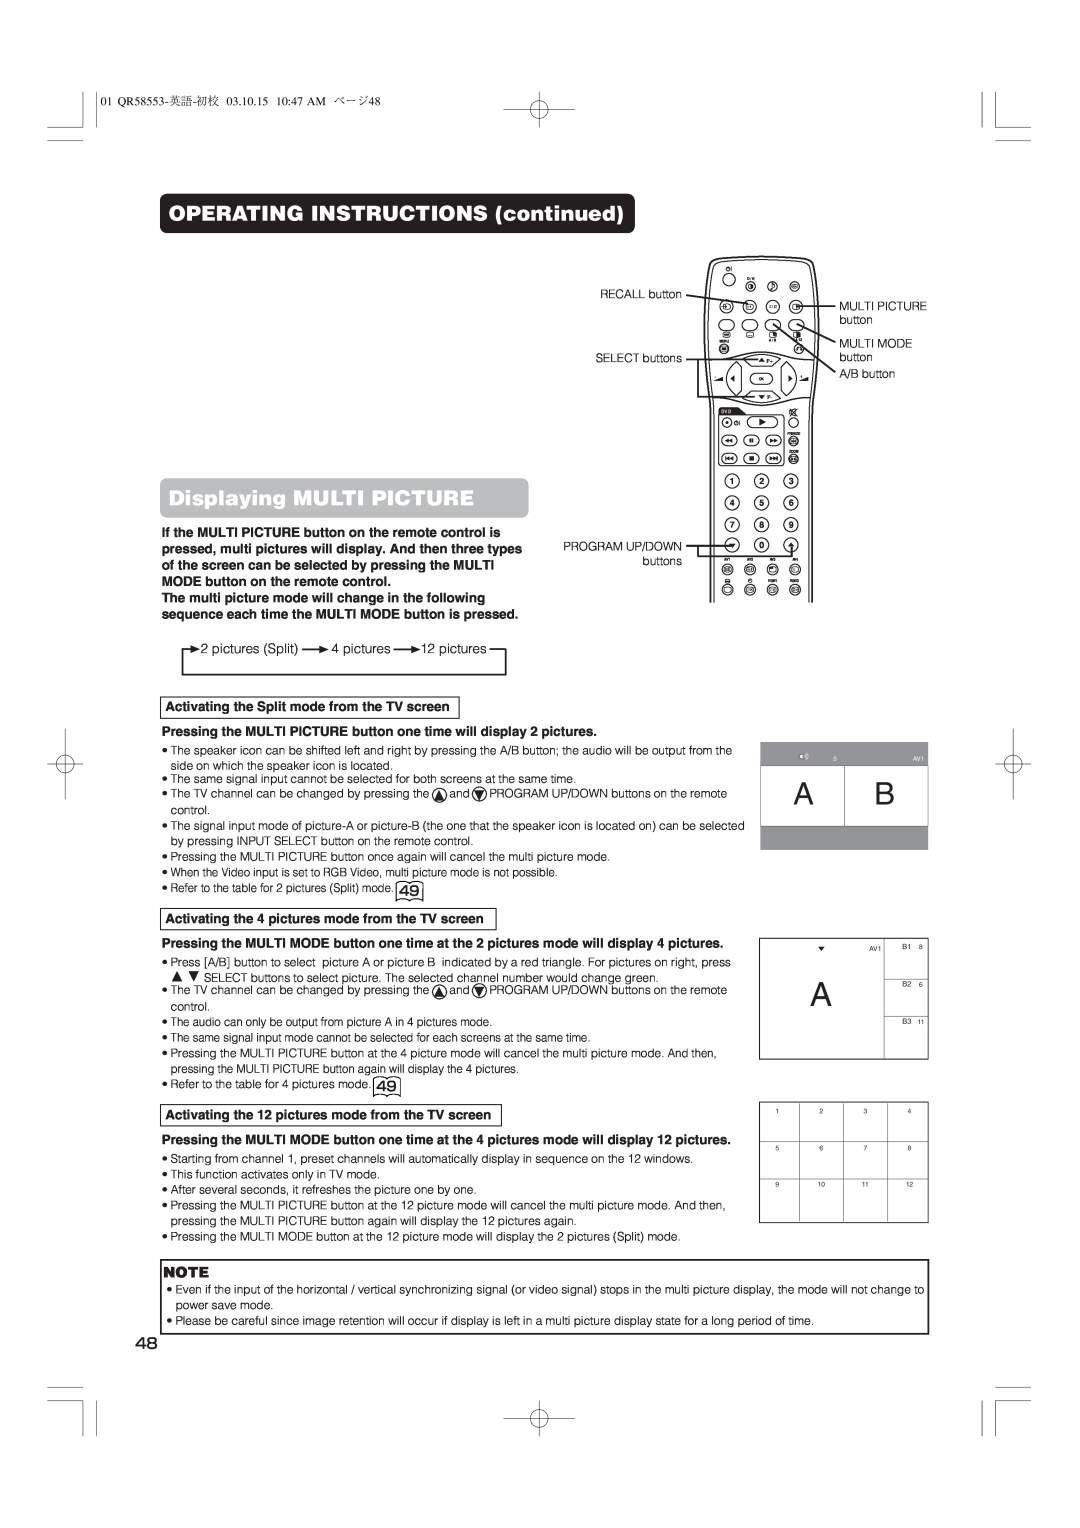 Hitachi 42PD5000 user manual Displaying MULTI PICTURE, OPERATING INSTRUCTIONS continued 